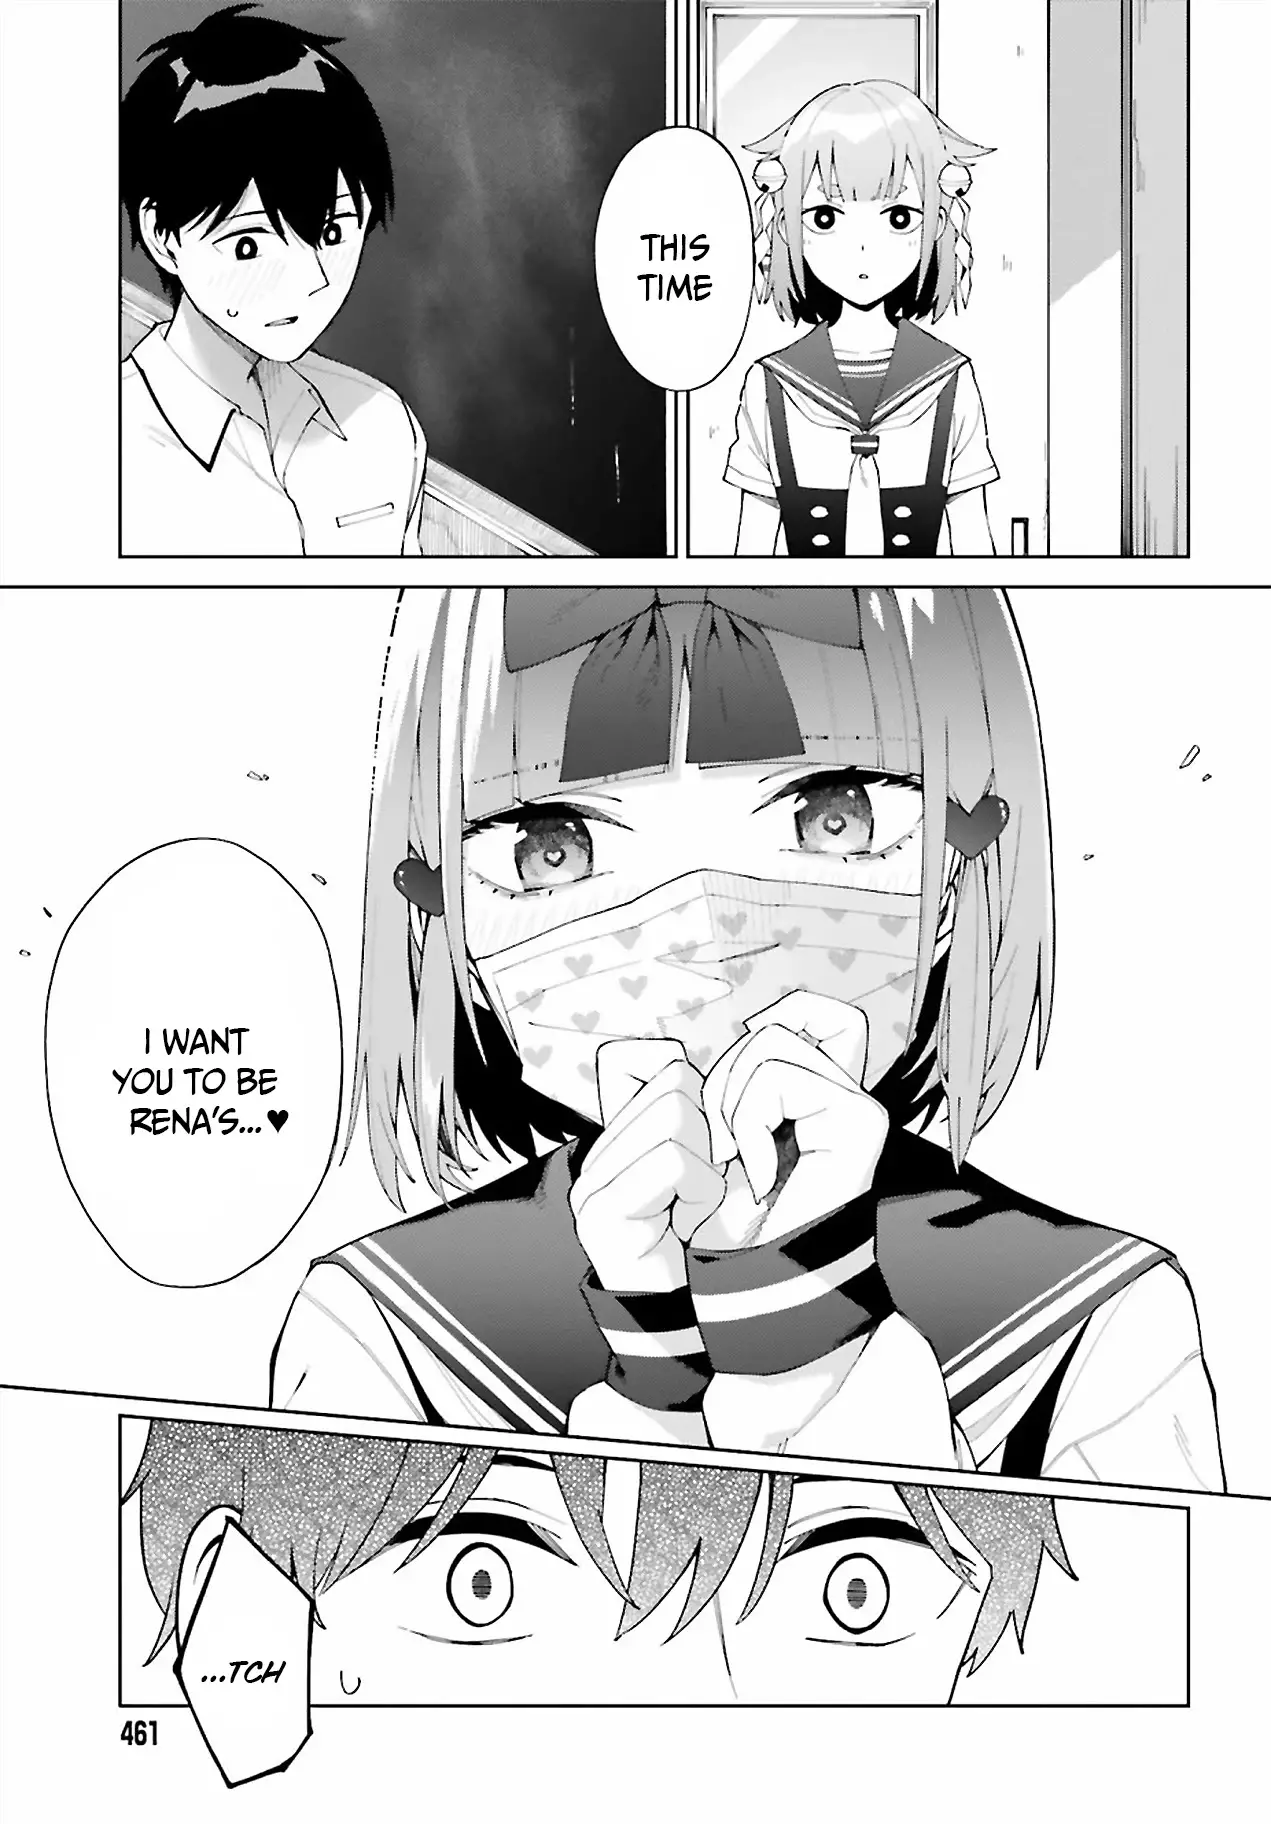 I Don't Understand Shirogane-San's Facial Expression At All - 6 page 28